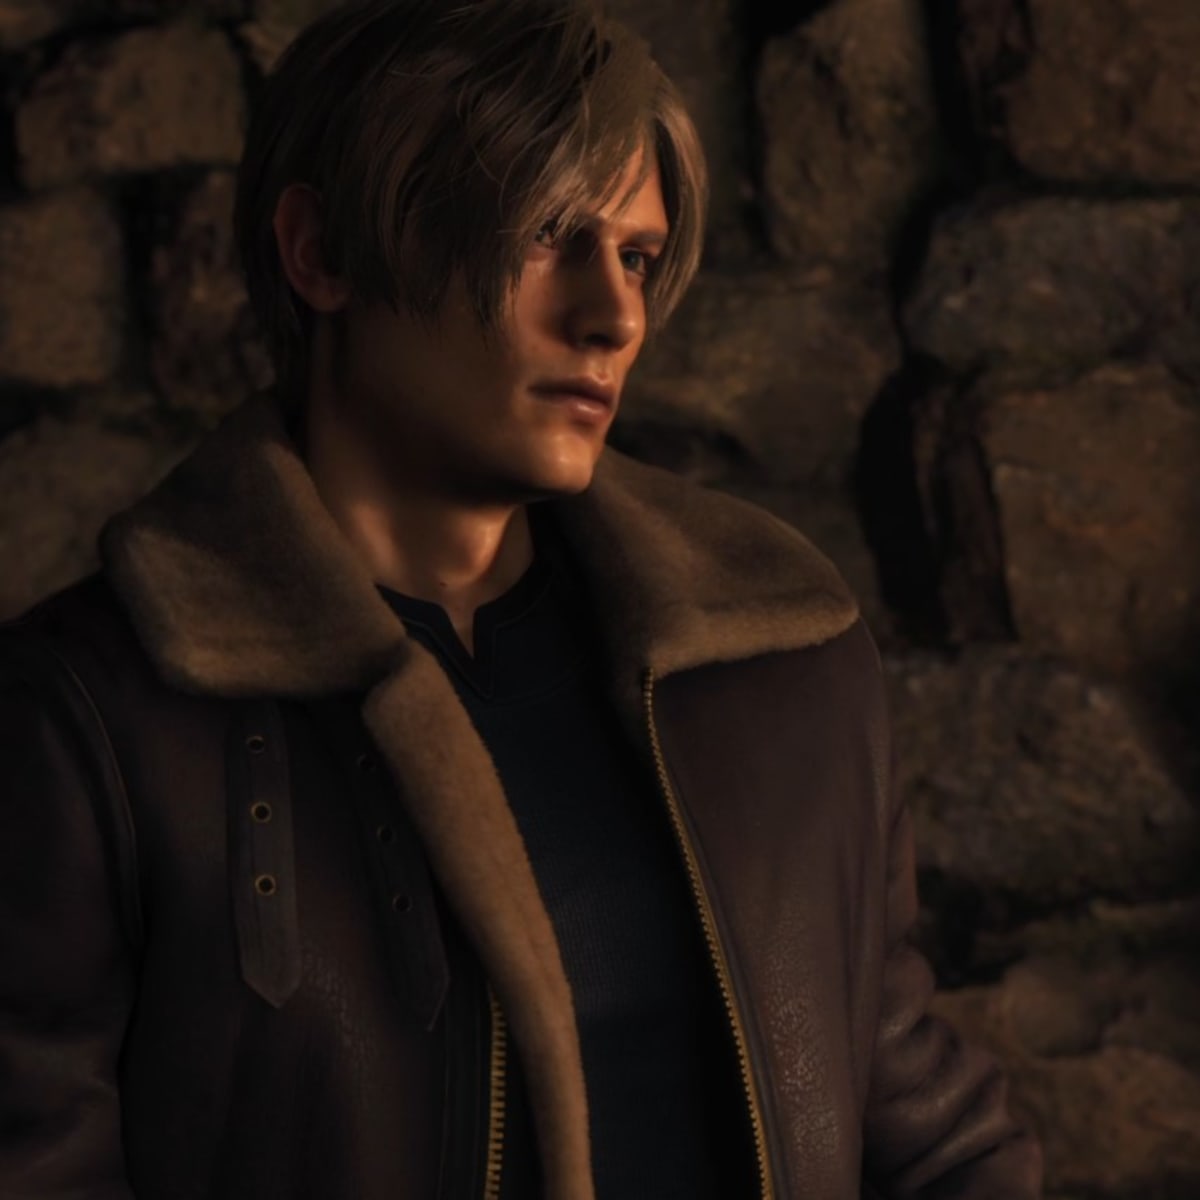 Resident Evil 4 remake: How to survive the Village Siege - Video Games on  Sports Illustrated